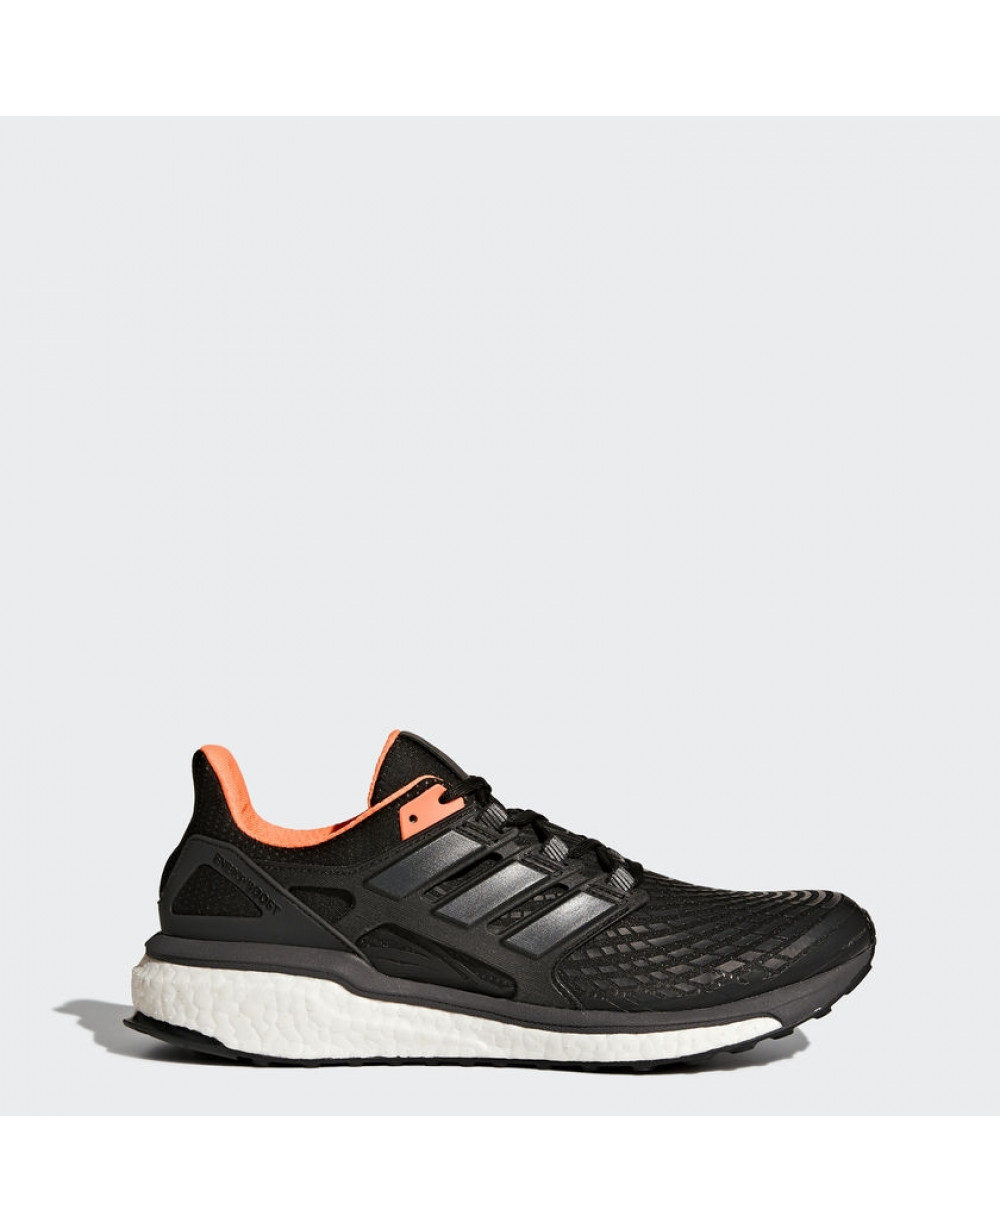 Adidas Energy Boost Running Shoes For Men BB3452